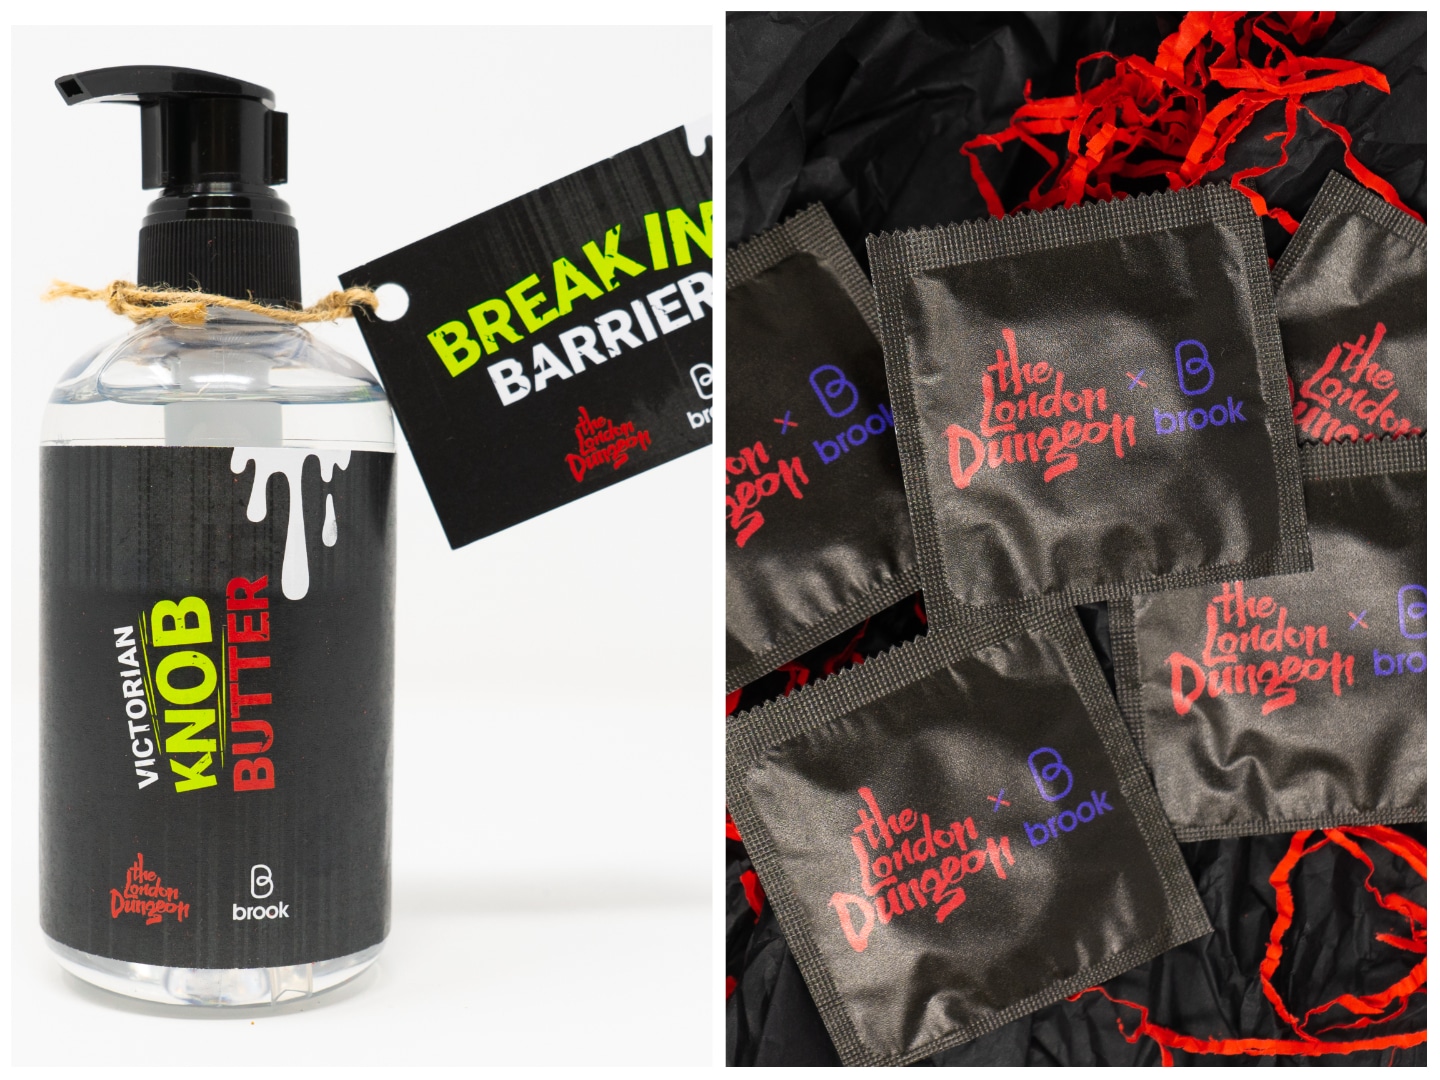 The kit features Knob Butter lube and London Dungeon-branded condoms.